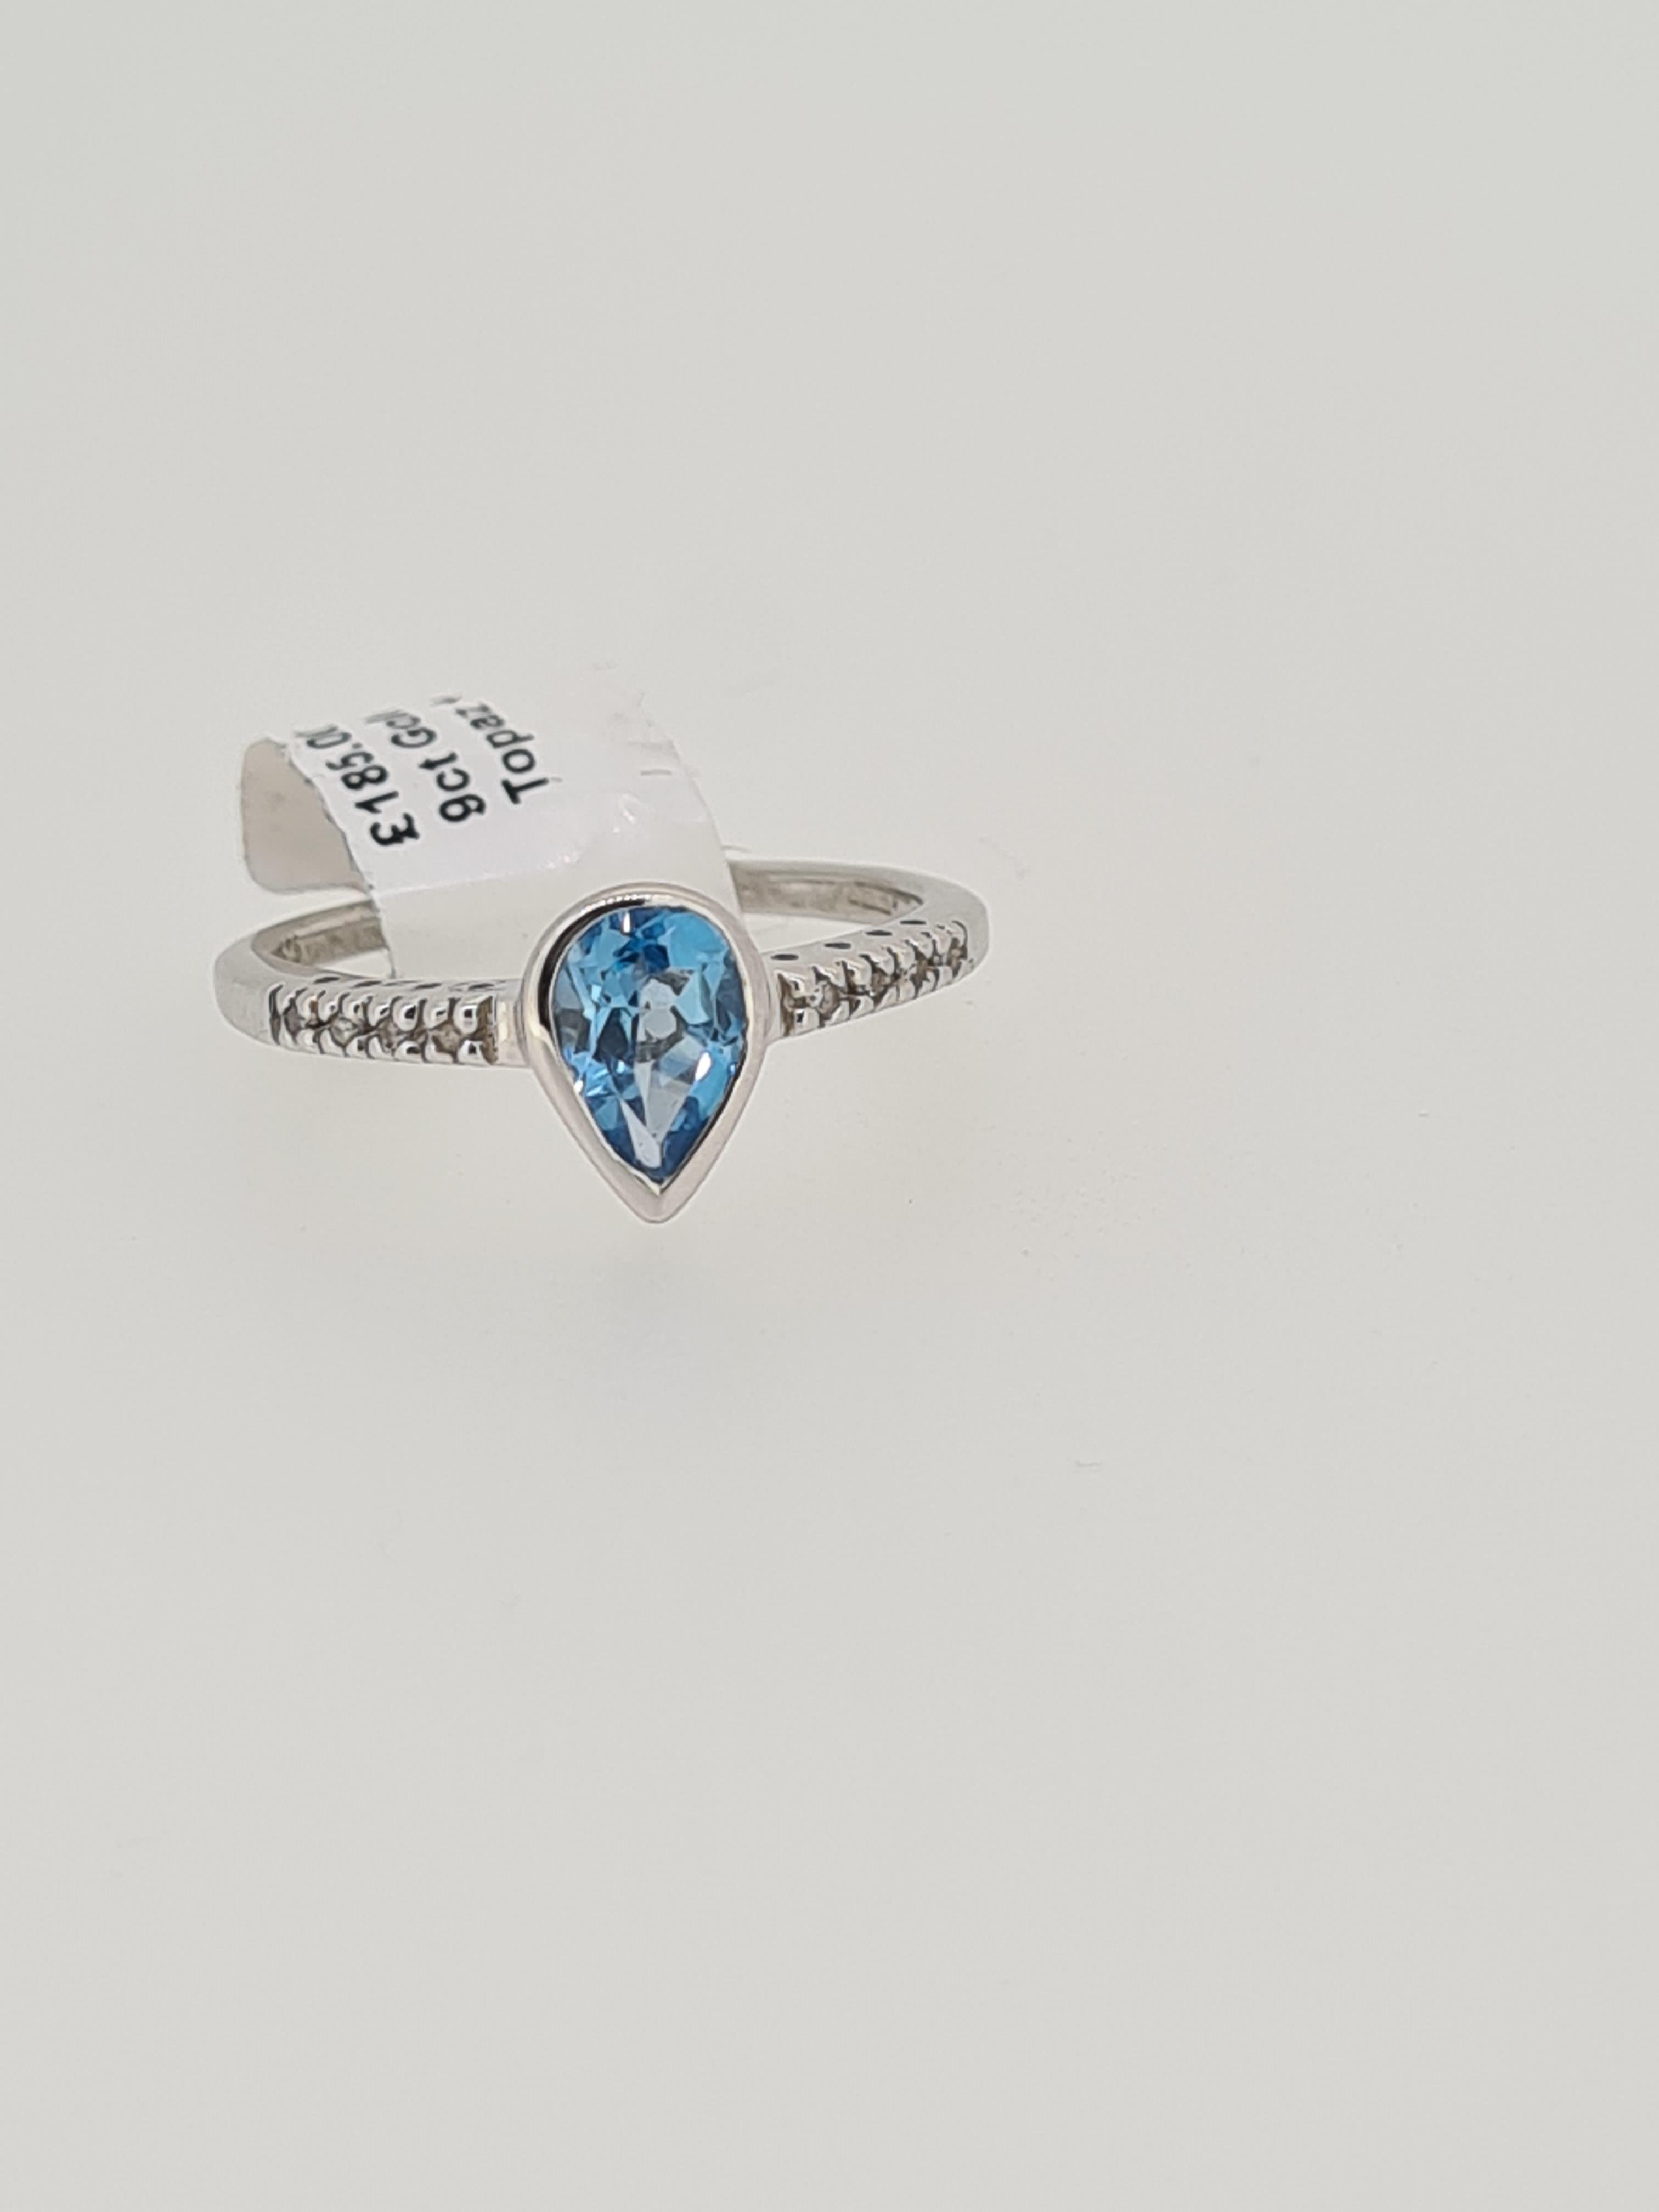 9ct white gold topaz and diamond ring - Image 4 of 4